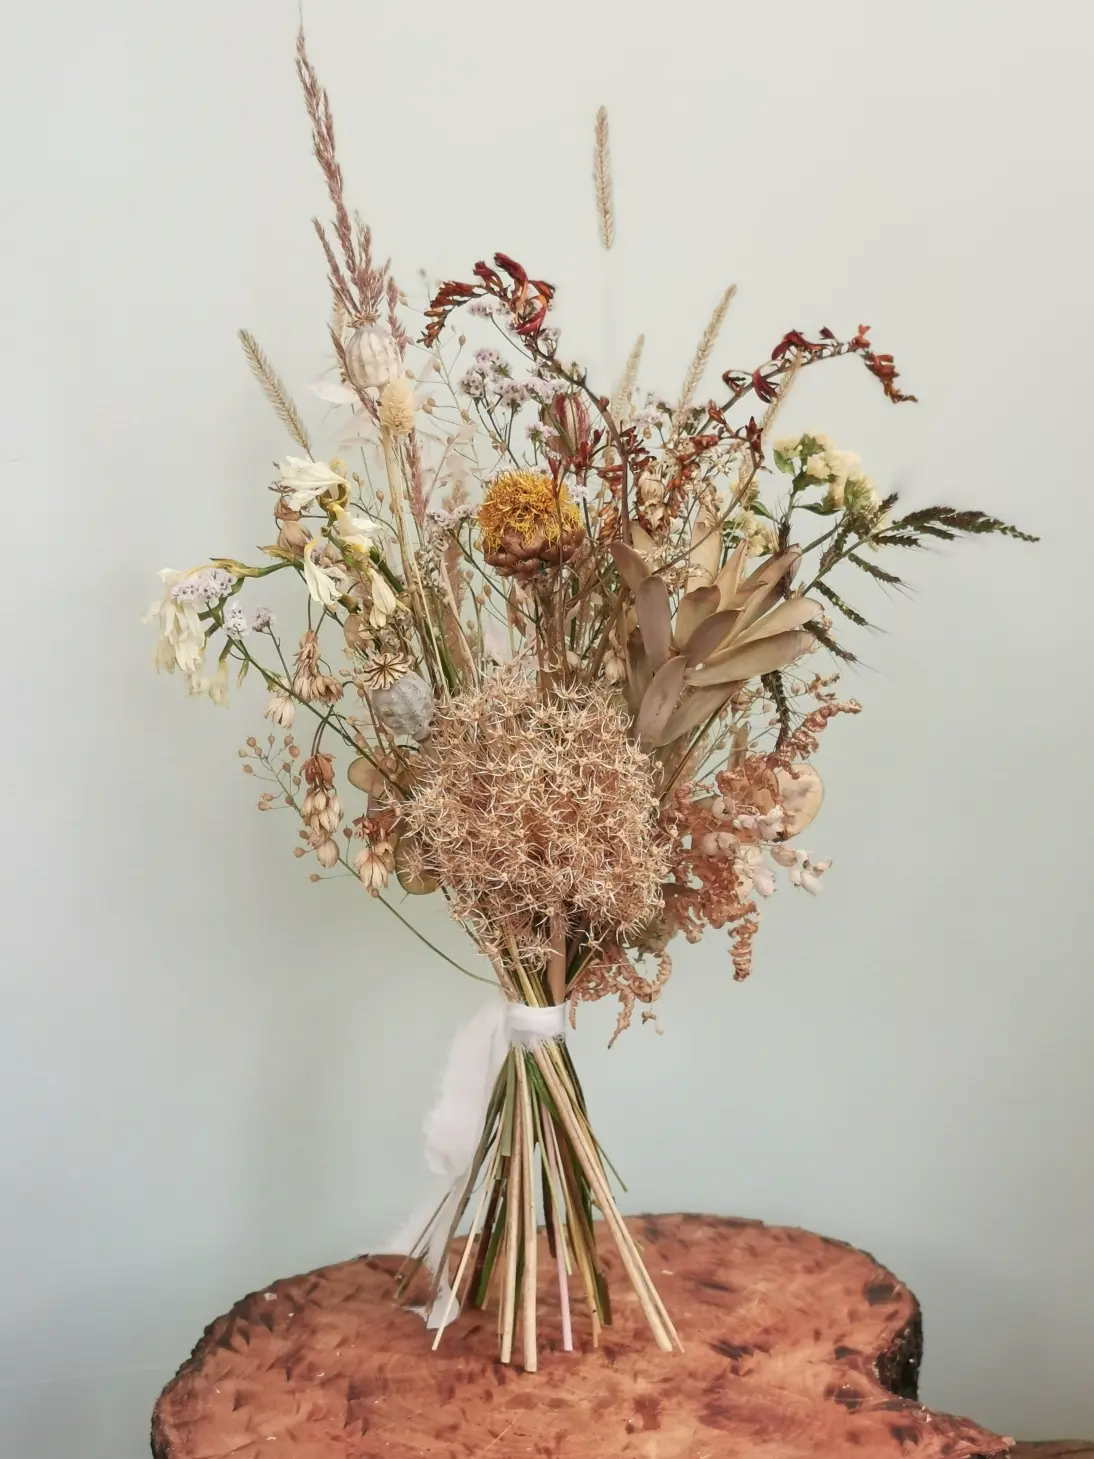 A natural bouquet of dried flowers in the form of a neat bouquet.